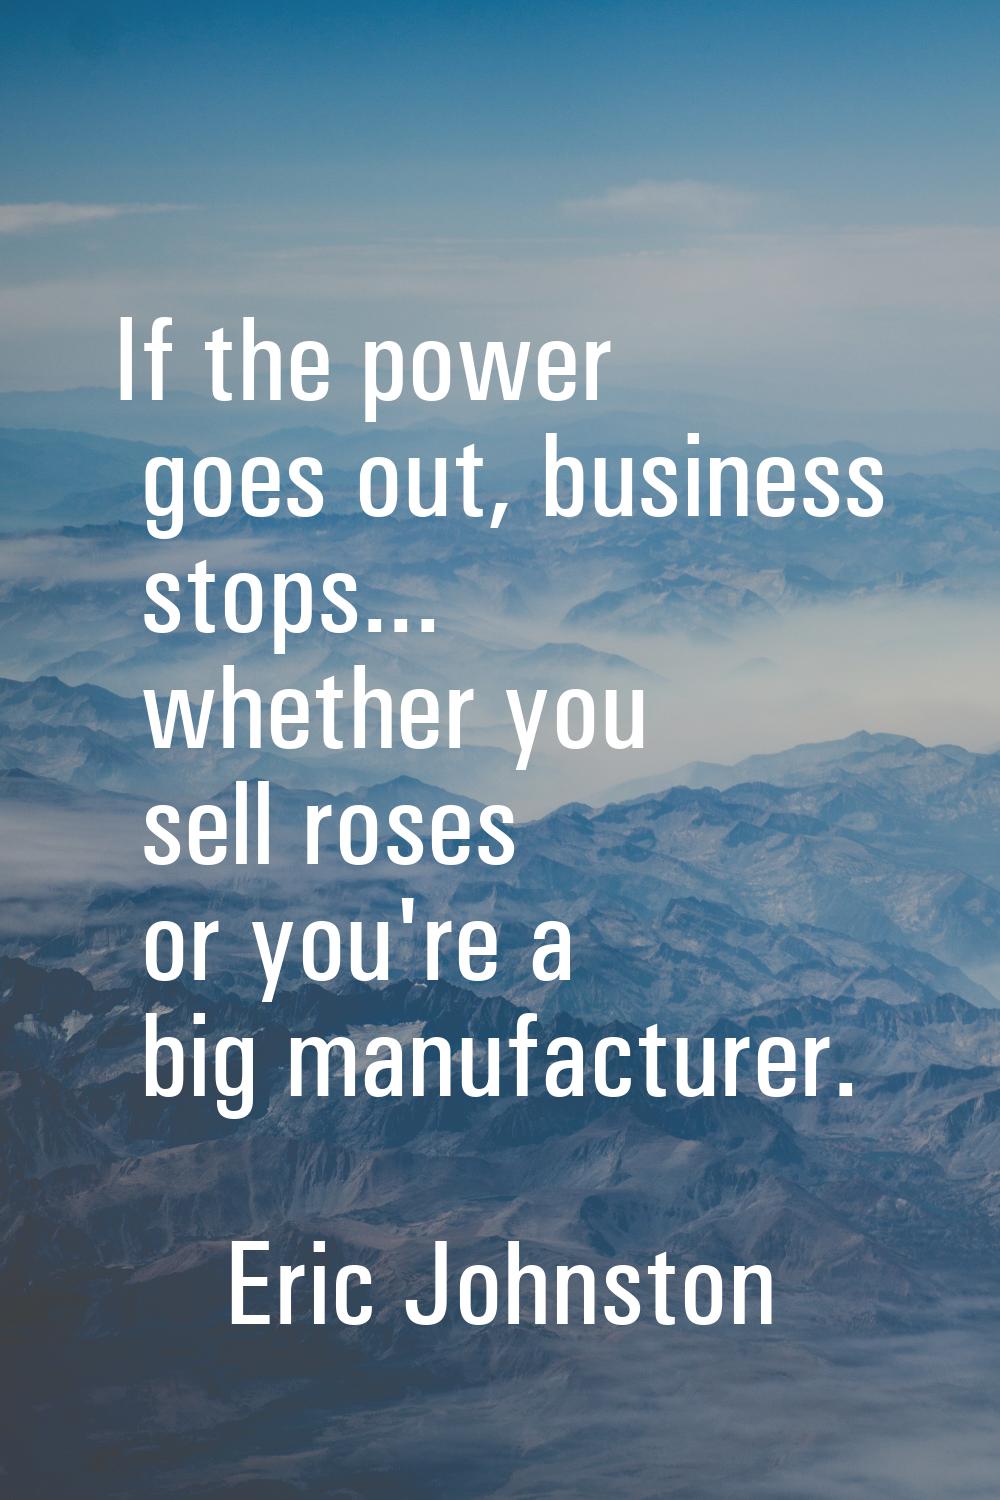 If the power goes out, business stops... whether you sell roses or you're a big manufacturer.